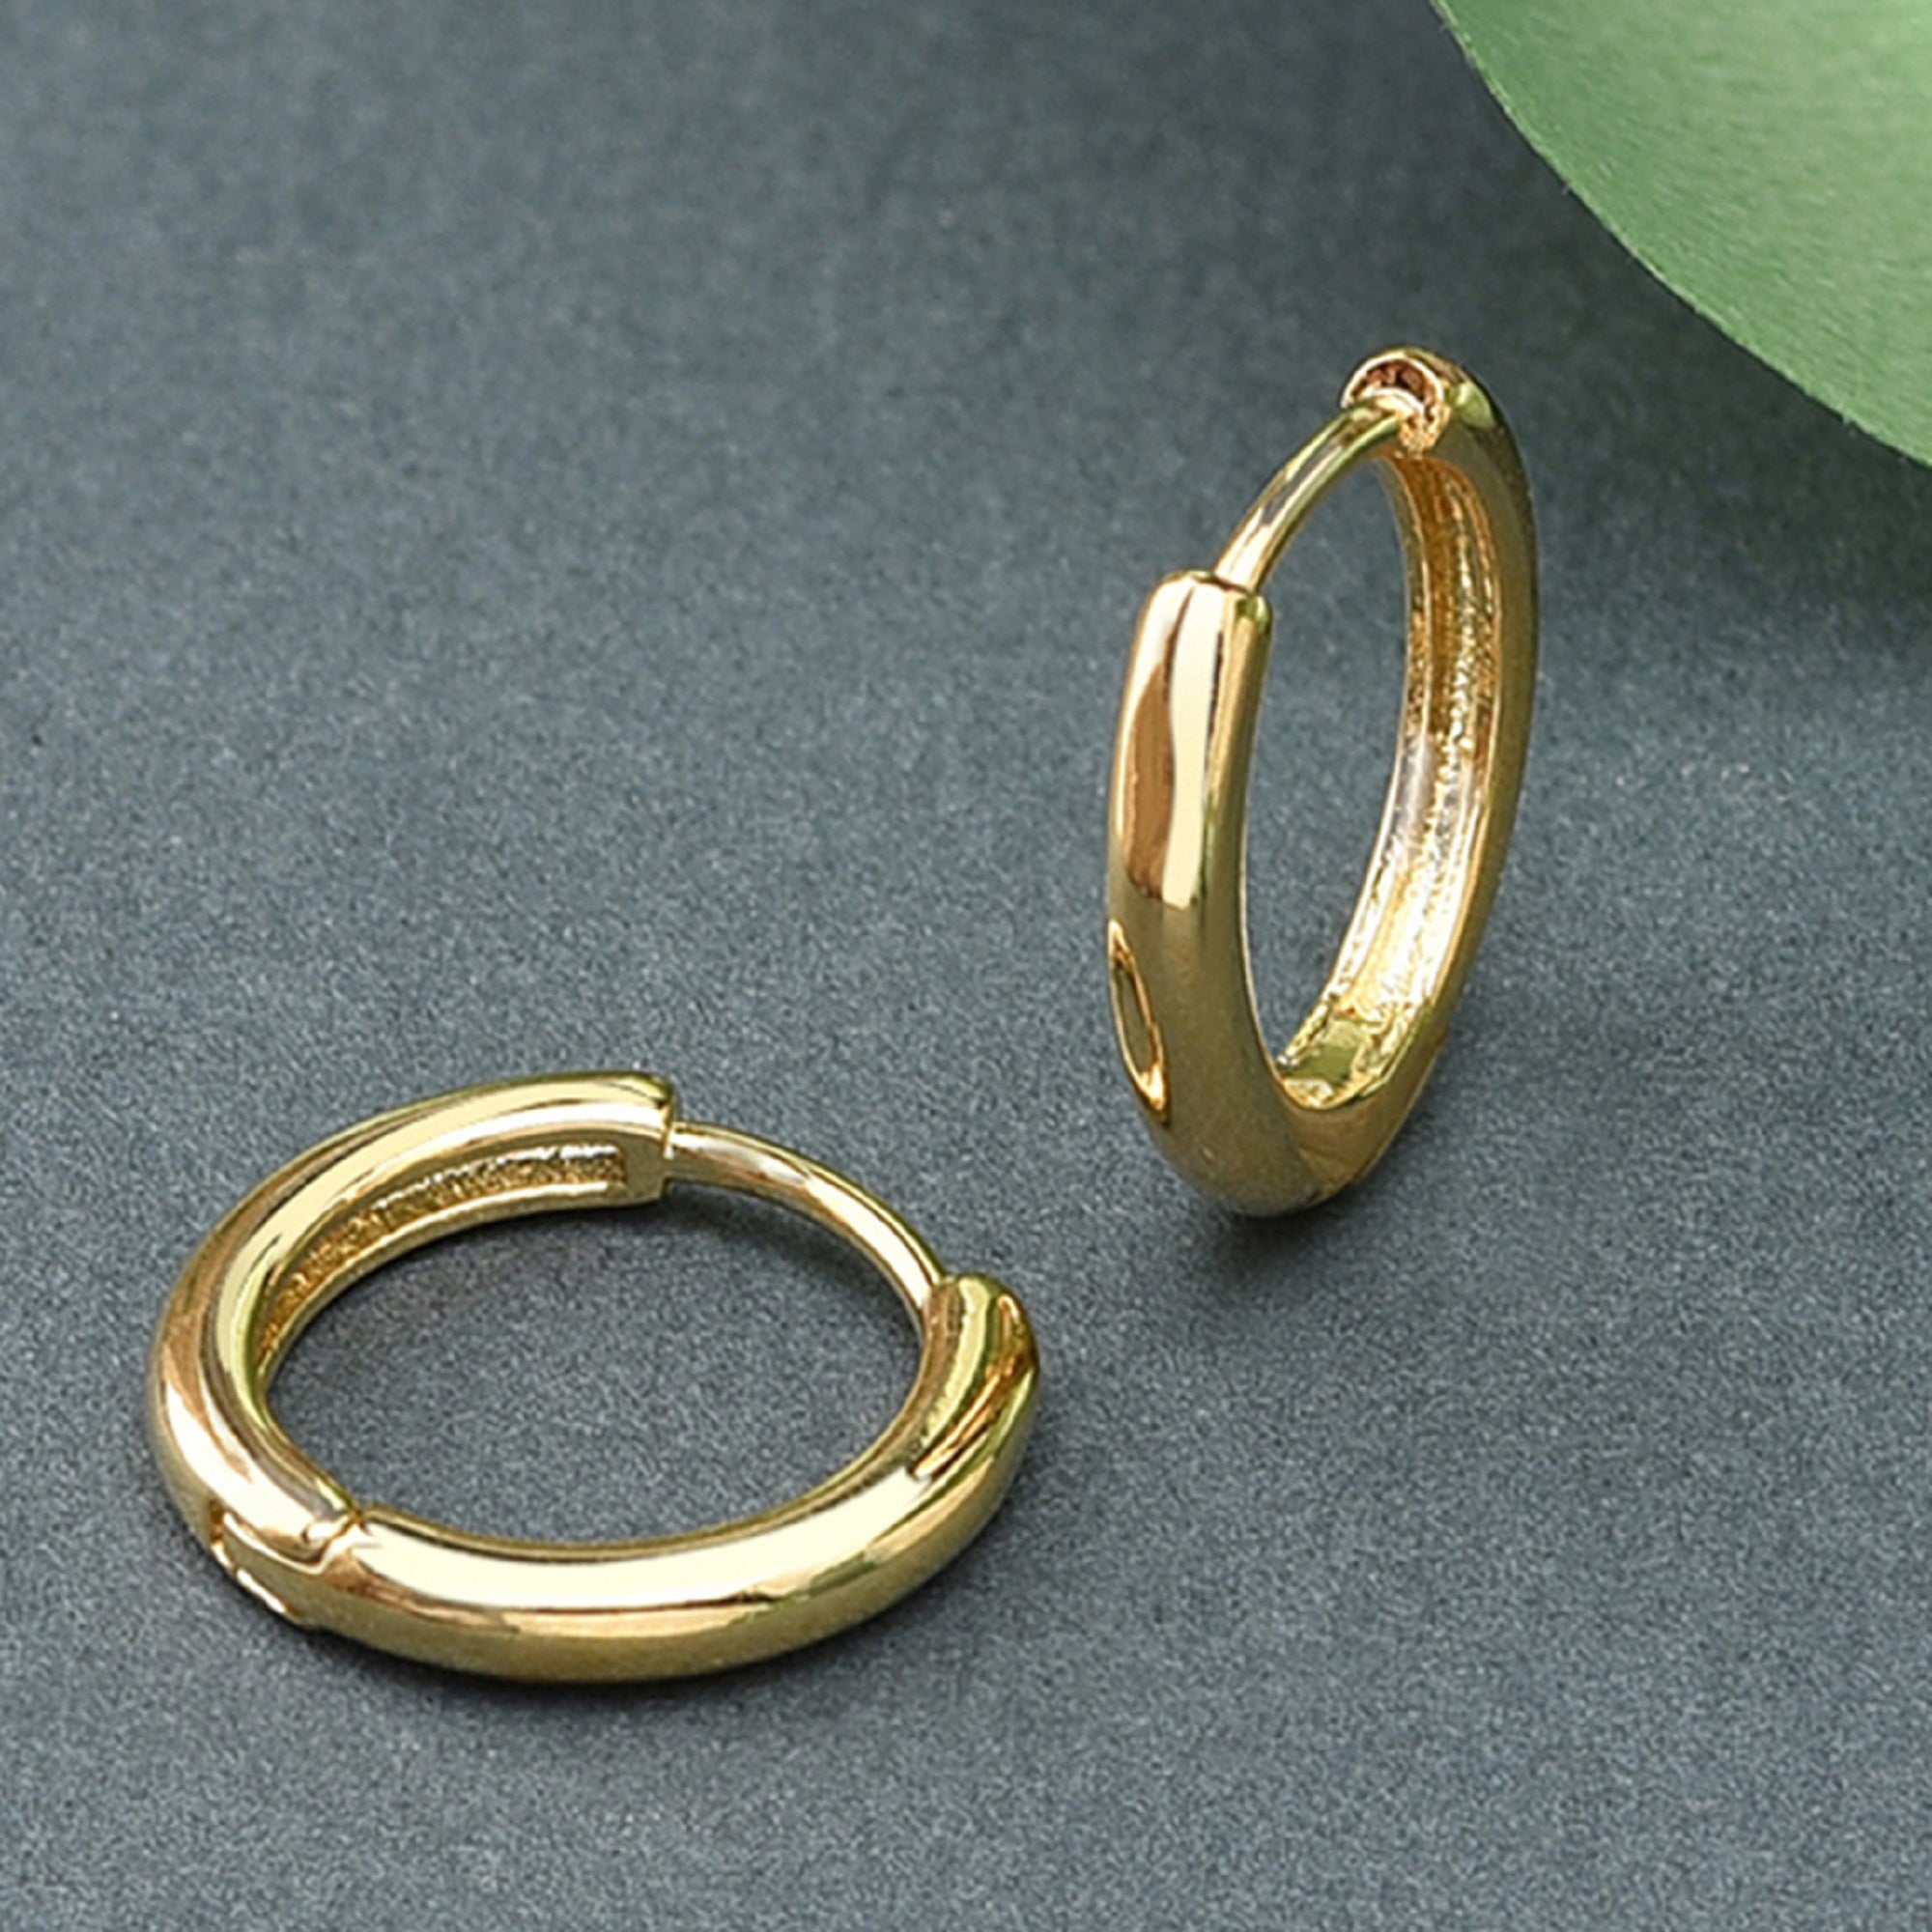 Real Gold Plated Plain Huggie Hoop Earrings For Women By Accessorize London